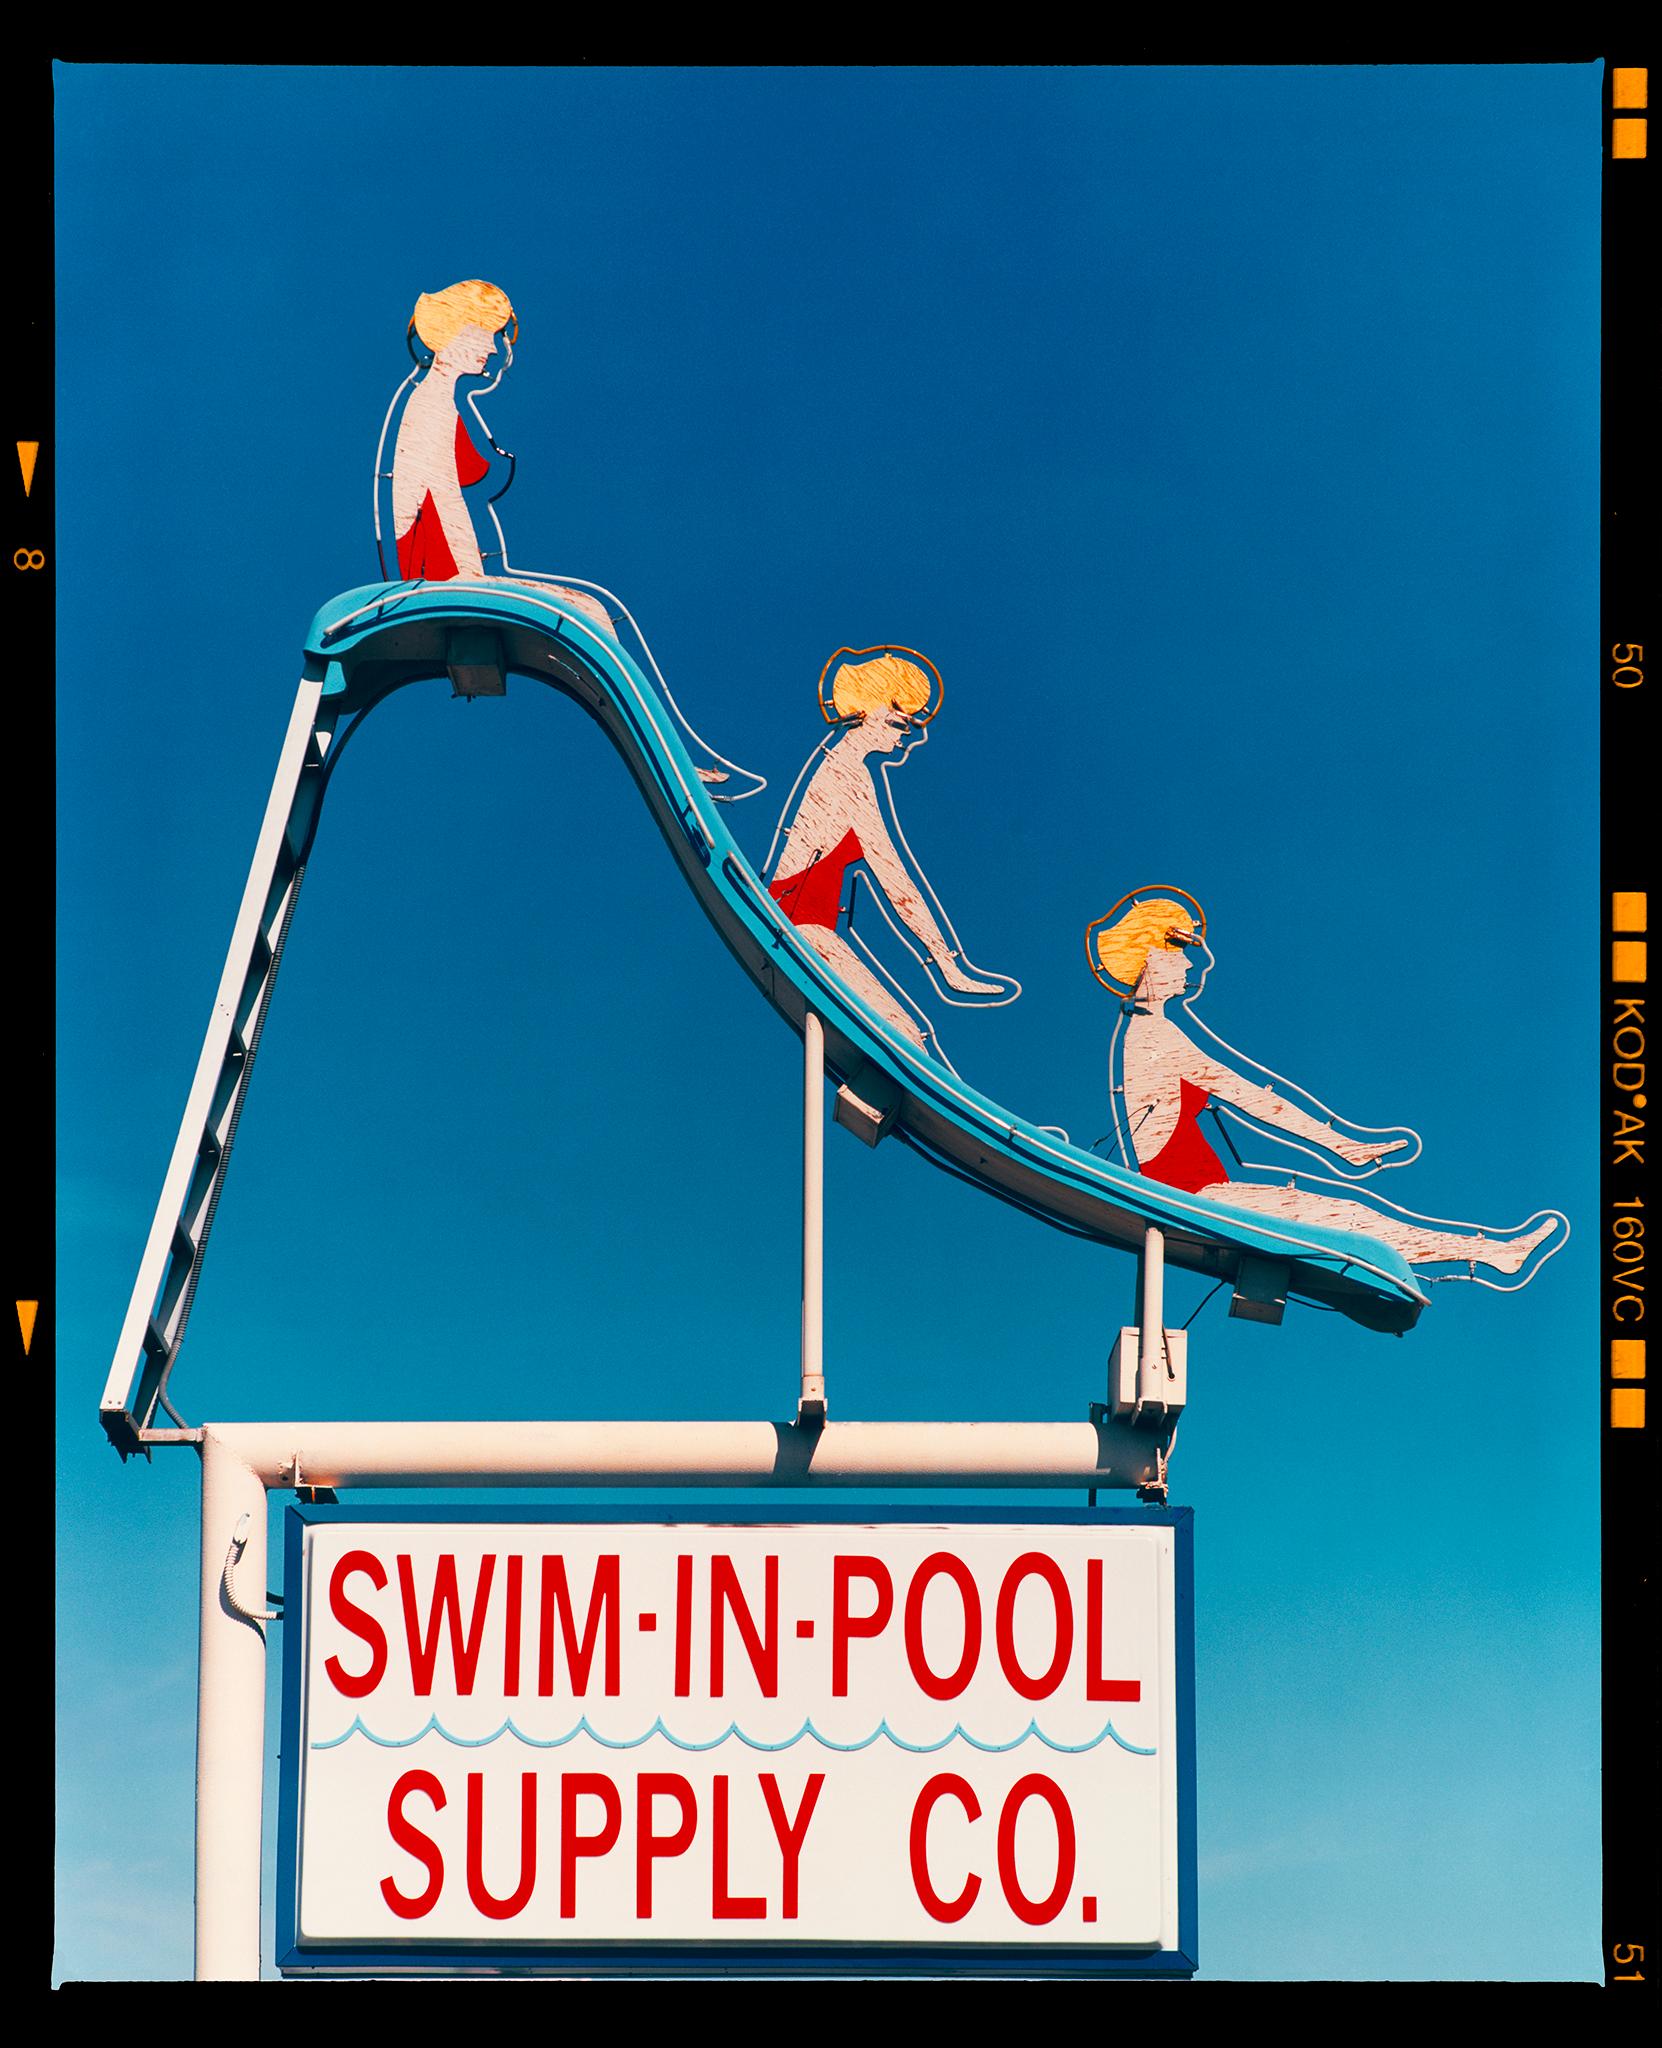 Richard Heeps Color Photograph - Swim-in-Pool Supply Co. Las Vegas - American Color Sign Photography 